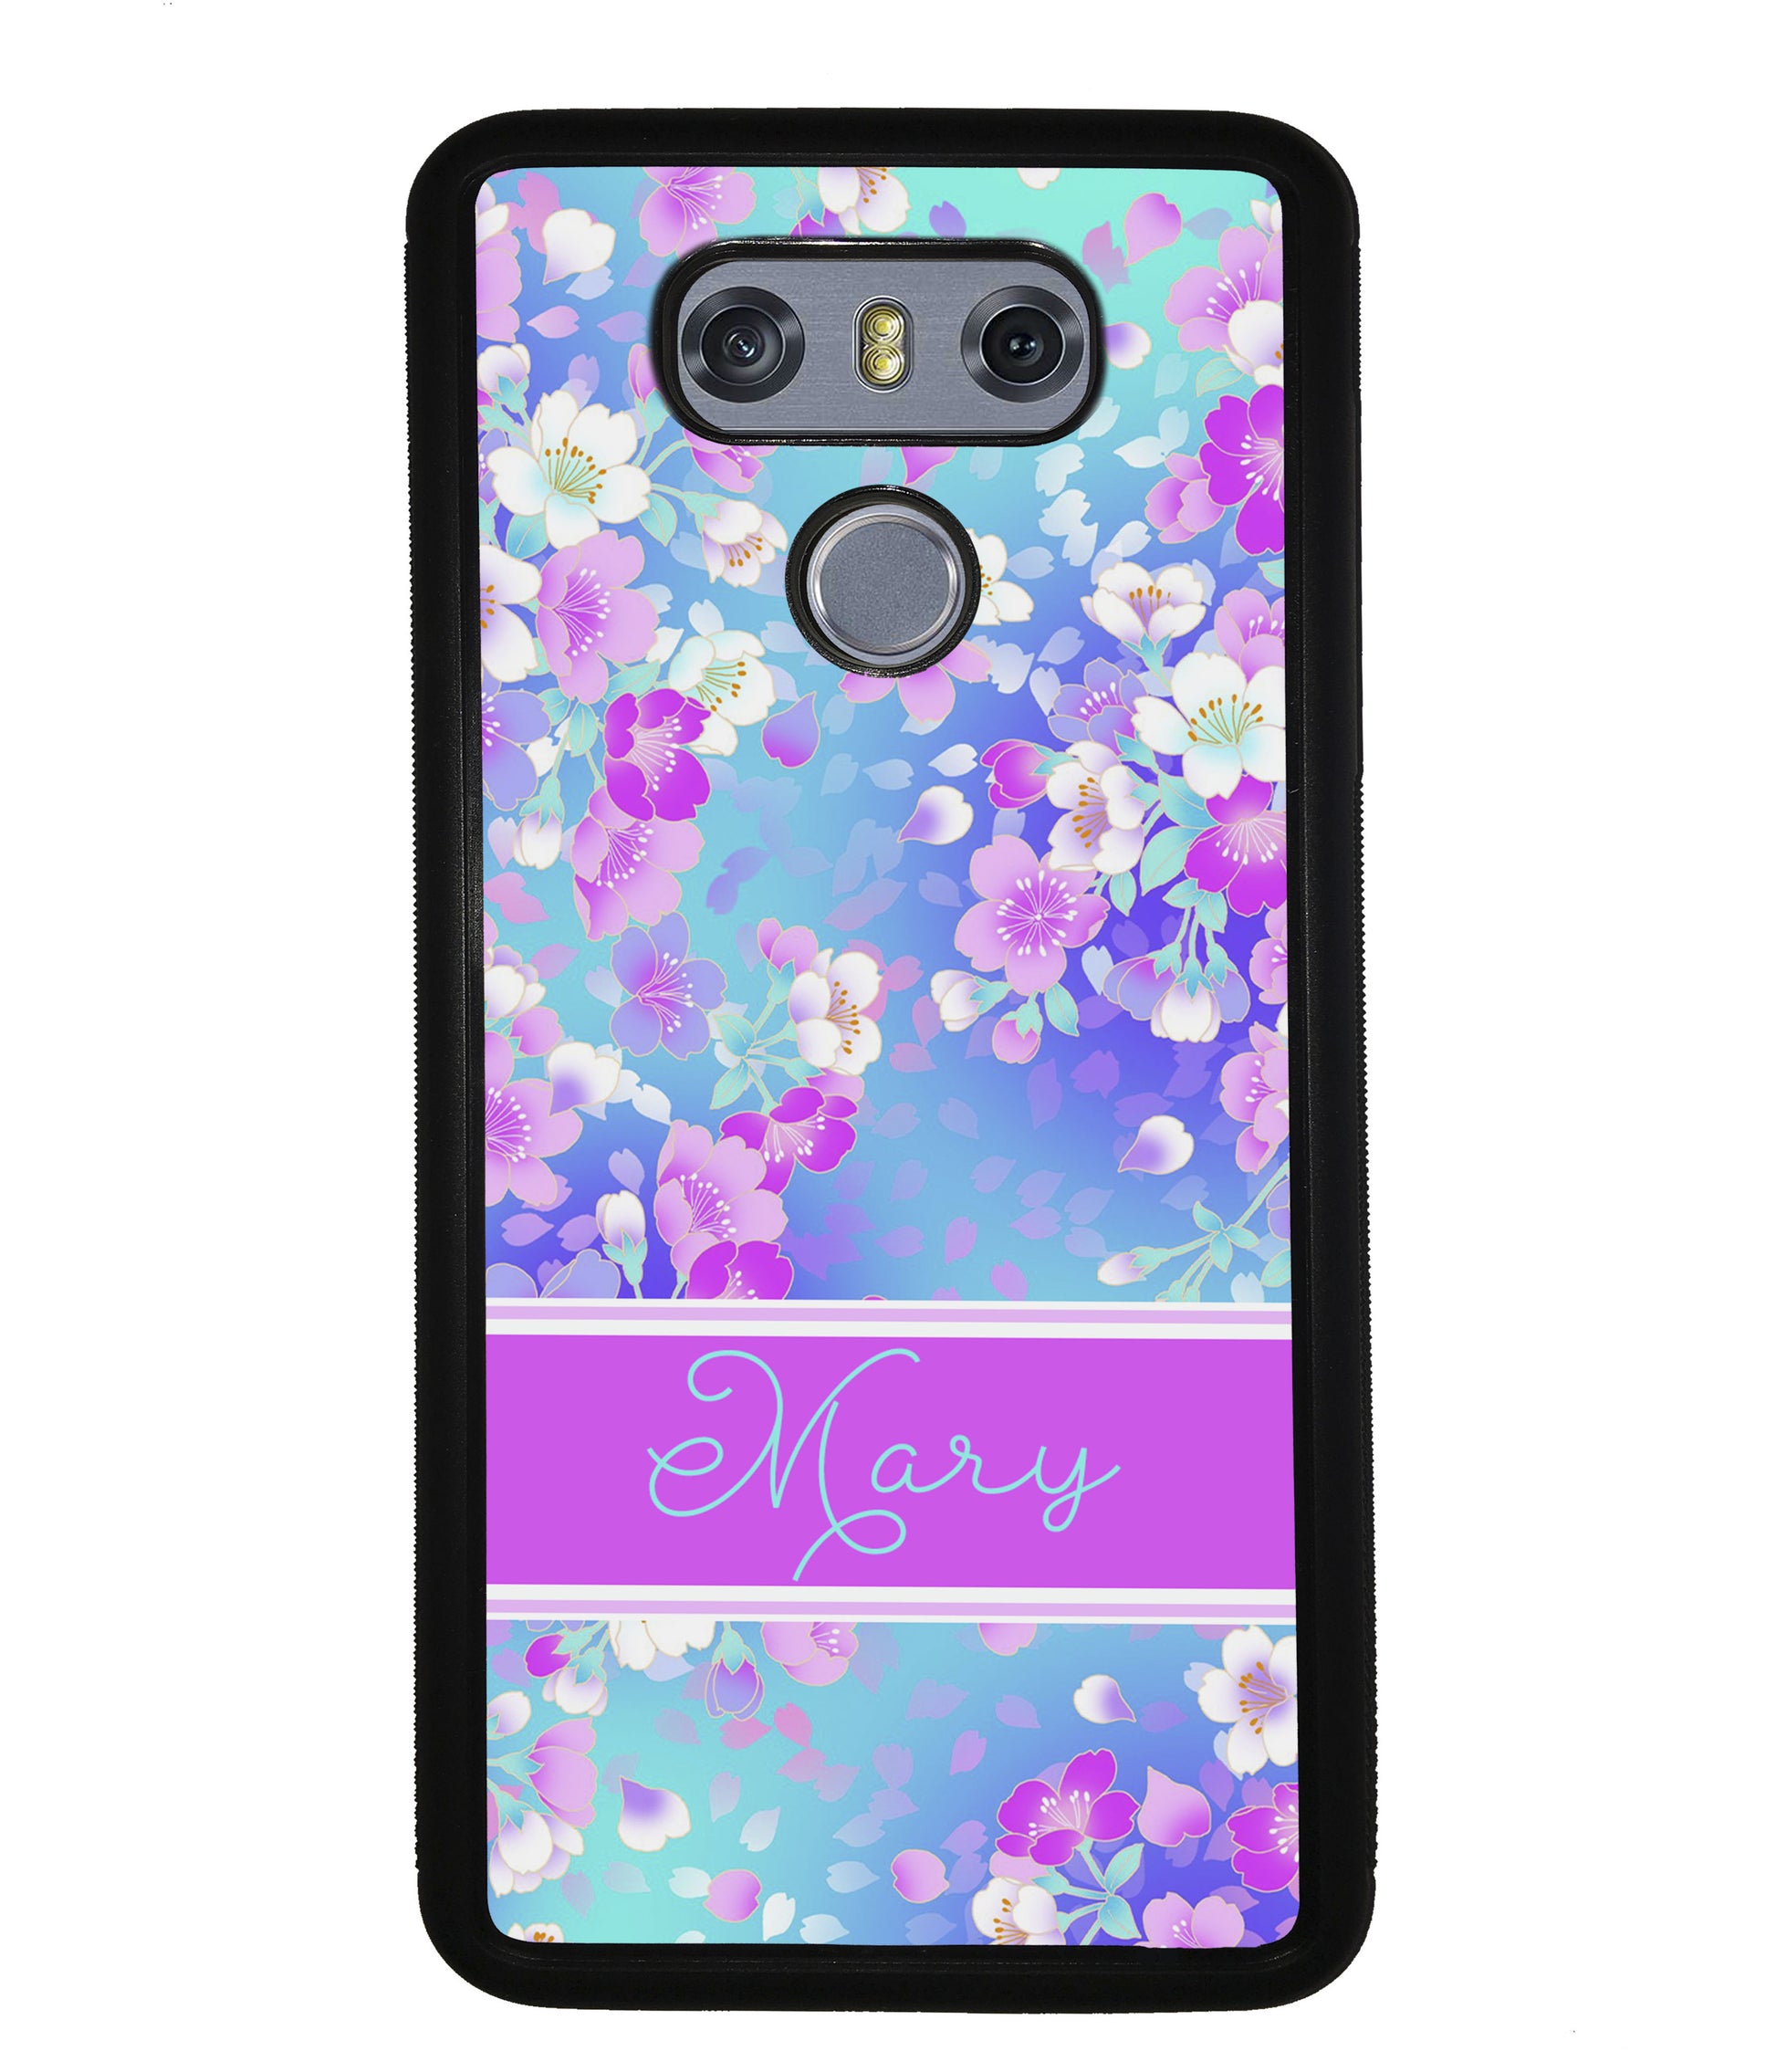 Neon Flower Pattern Personalized | LG Phone Case